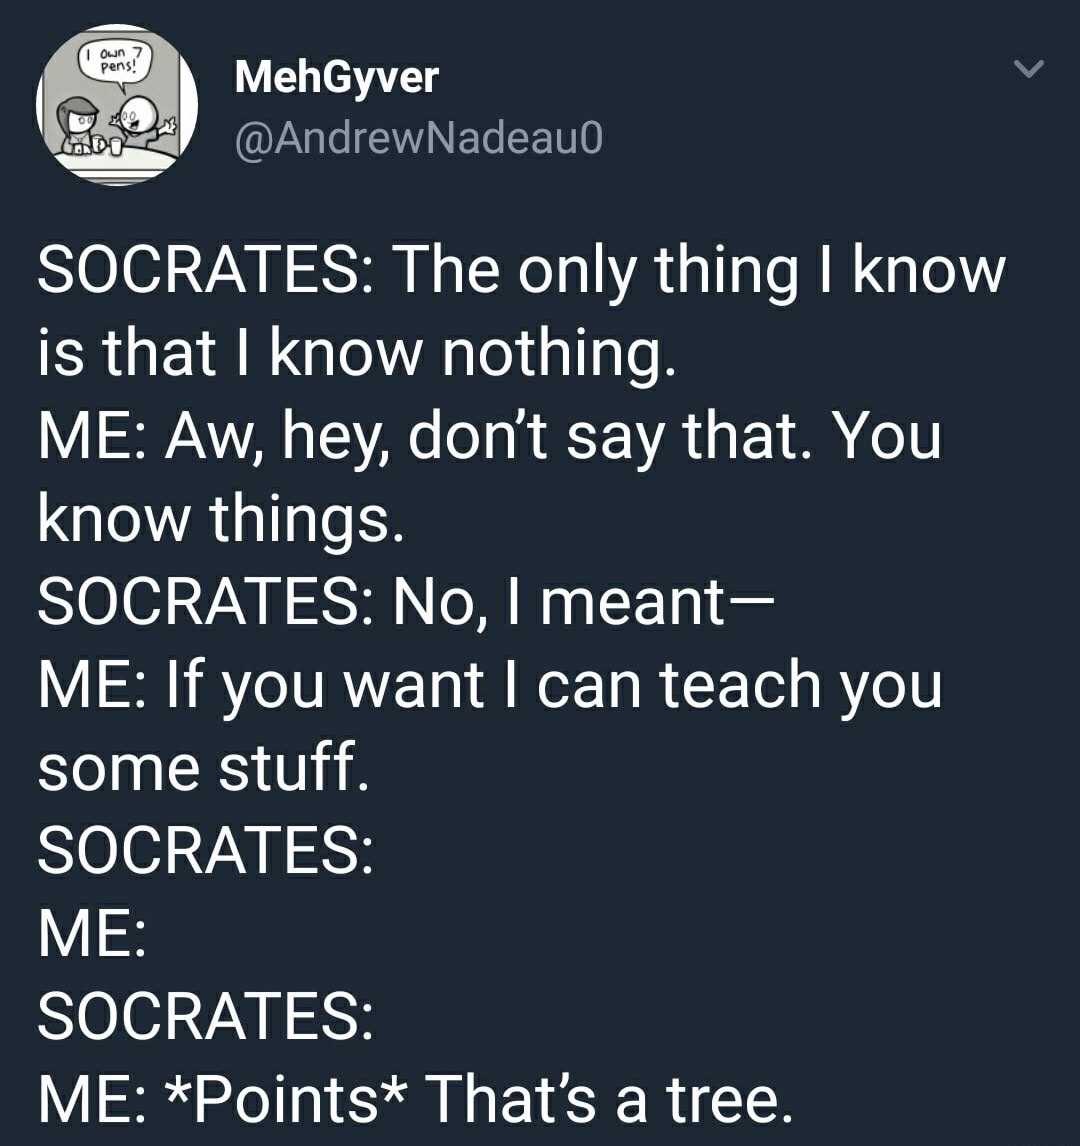 angle - I own 7 pens! MehGyver Socrates The only thing I know is that I know nothing. Me Aw, hey, don't say that. You know things. Socrates No, I meant Me If you want I can teach you some stuff. Socrates Me Socrates Me Points That's a tree.